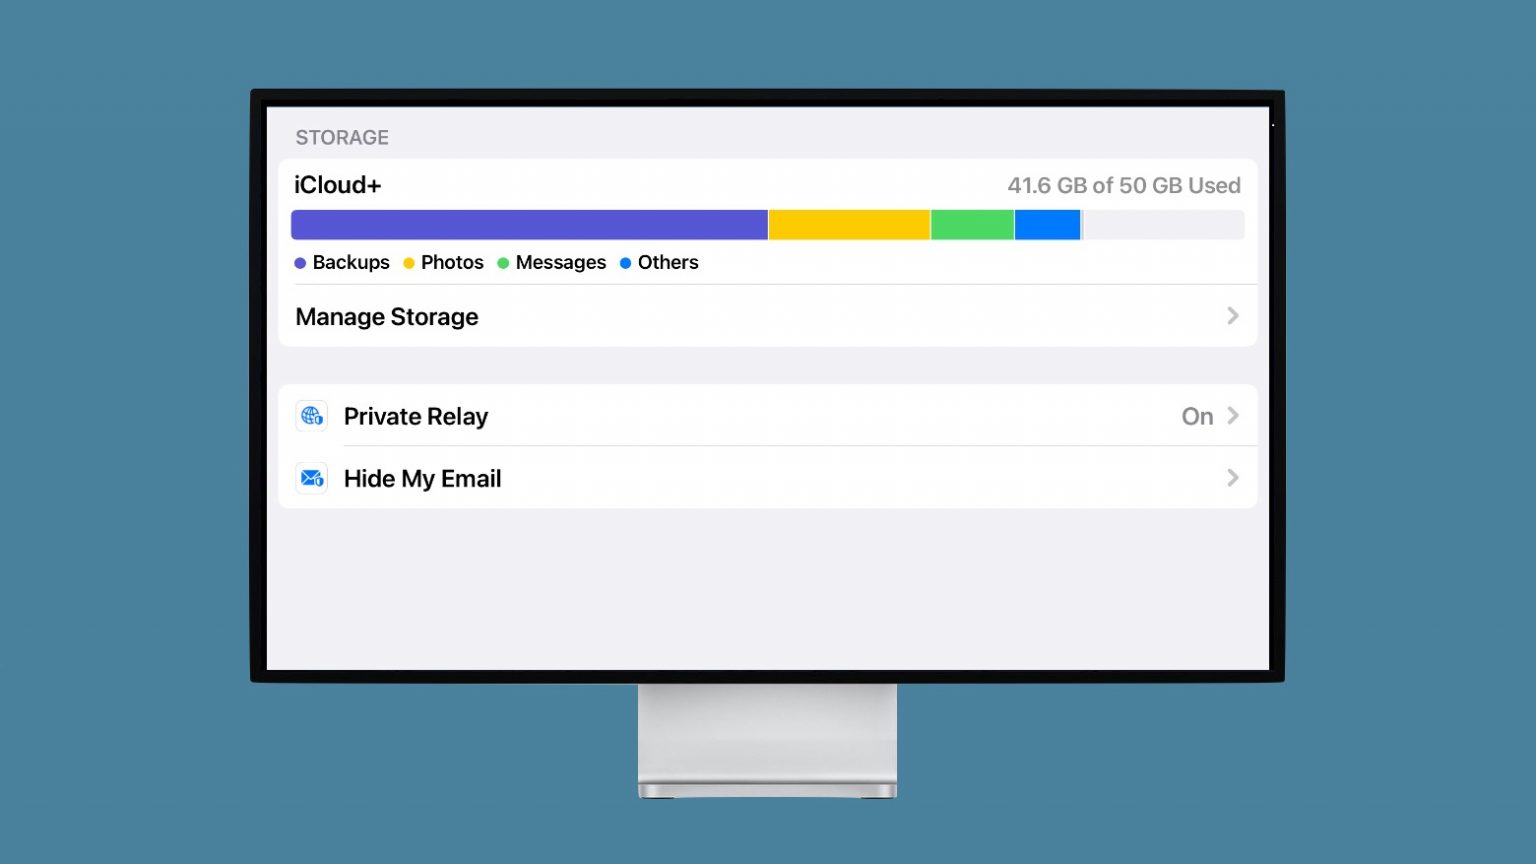 Private Relay makes paying $1 a month for iCloud a bargain